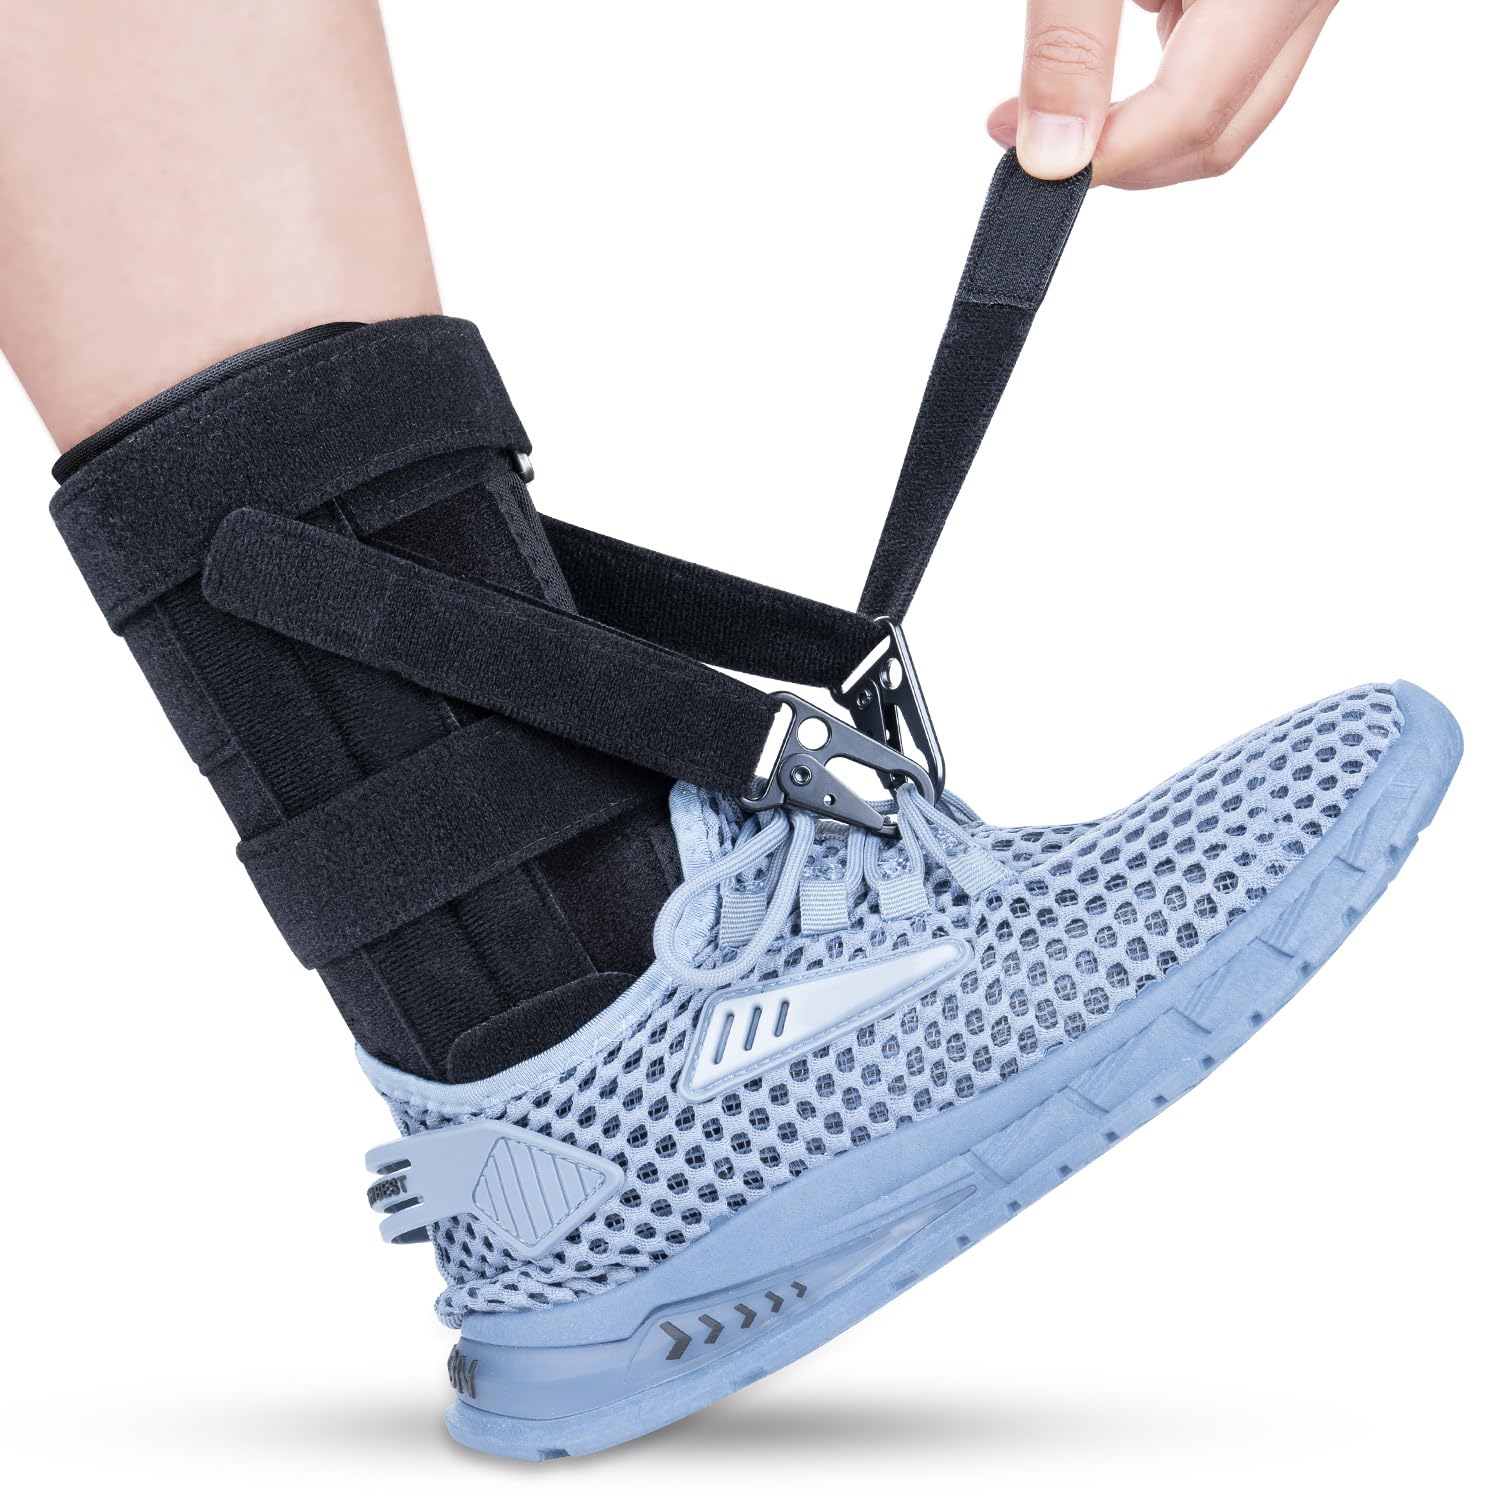 Sylong Afo Foot Drop Brace for Walking with Shoes Left [...]